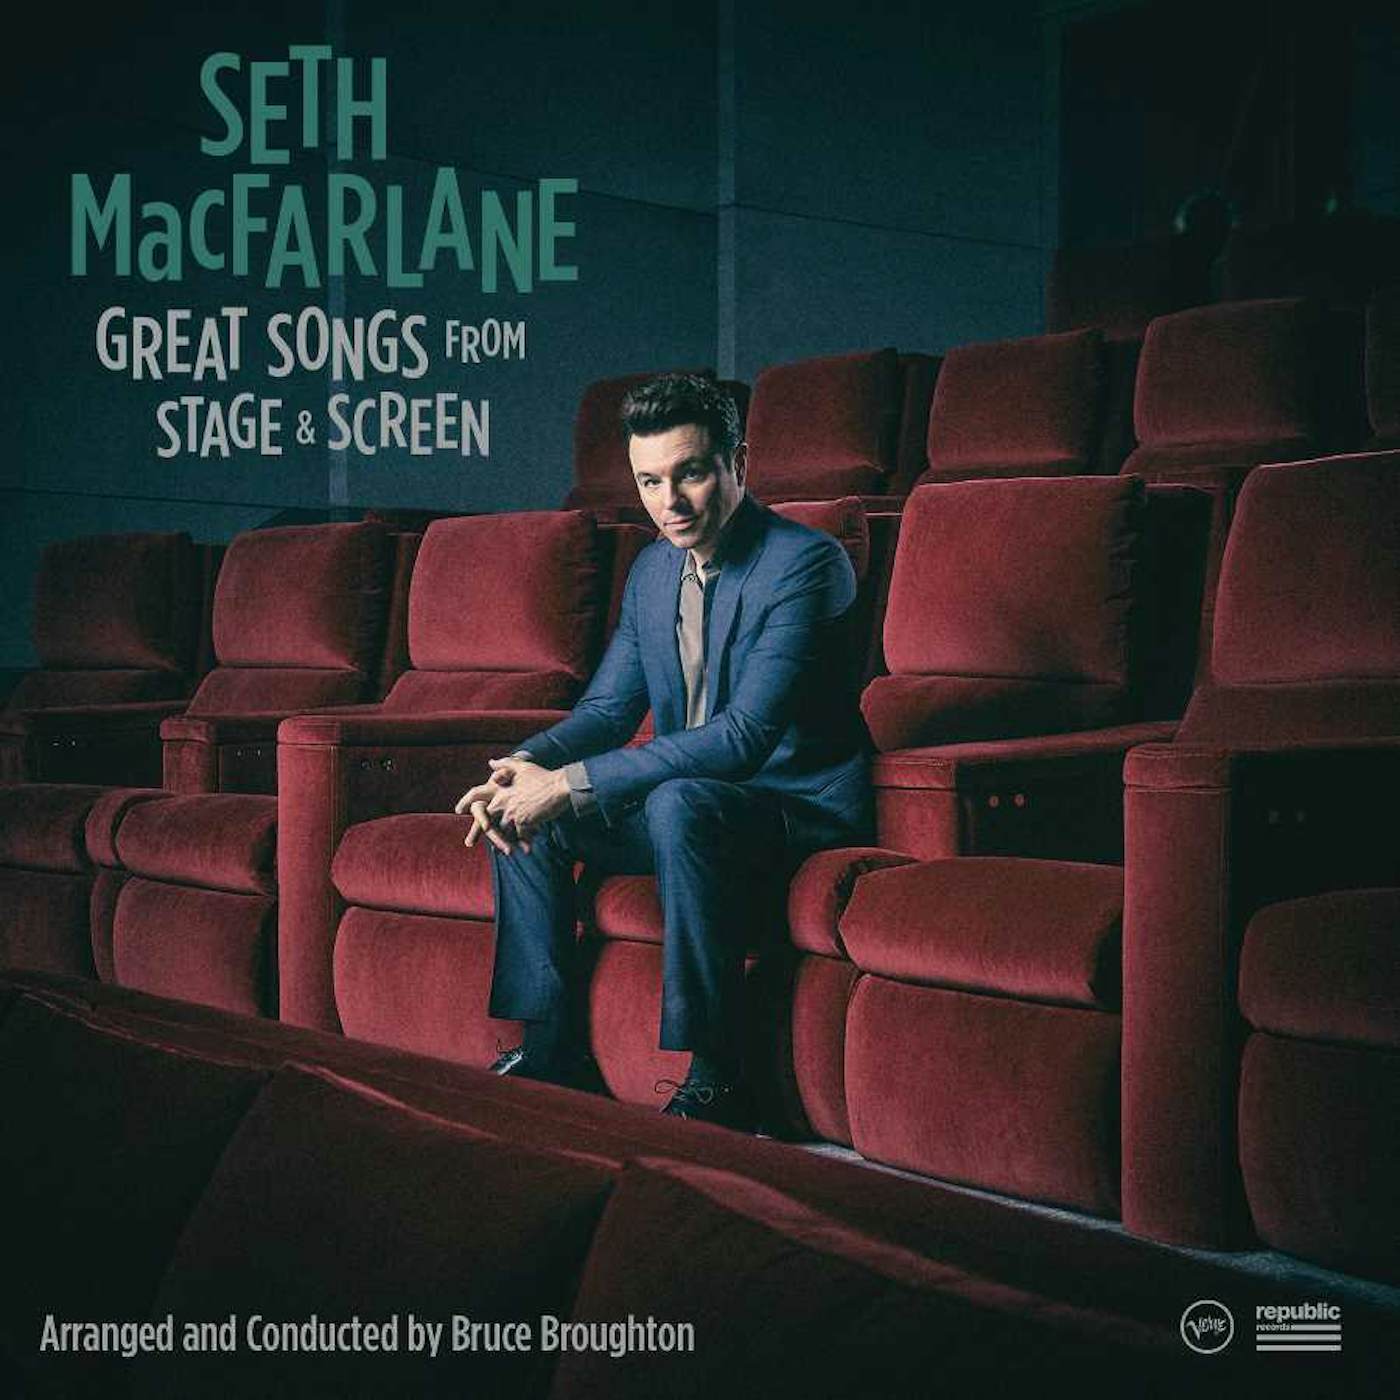 Seth MacFarlane GREAT SONGS FROM STAGE AND SCREEN CD